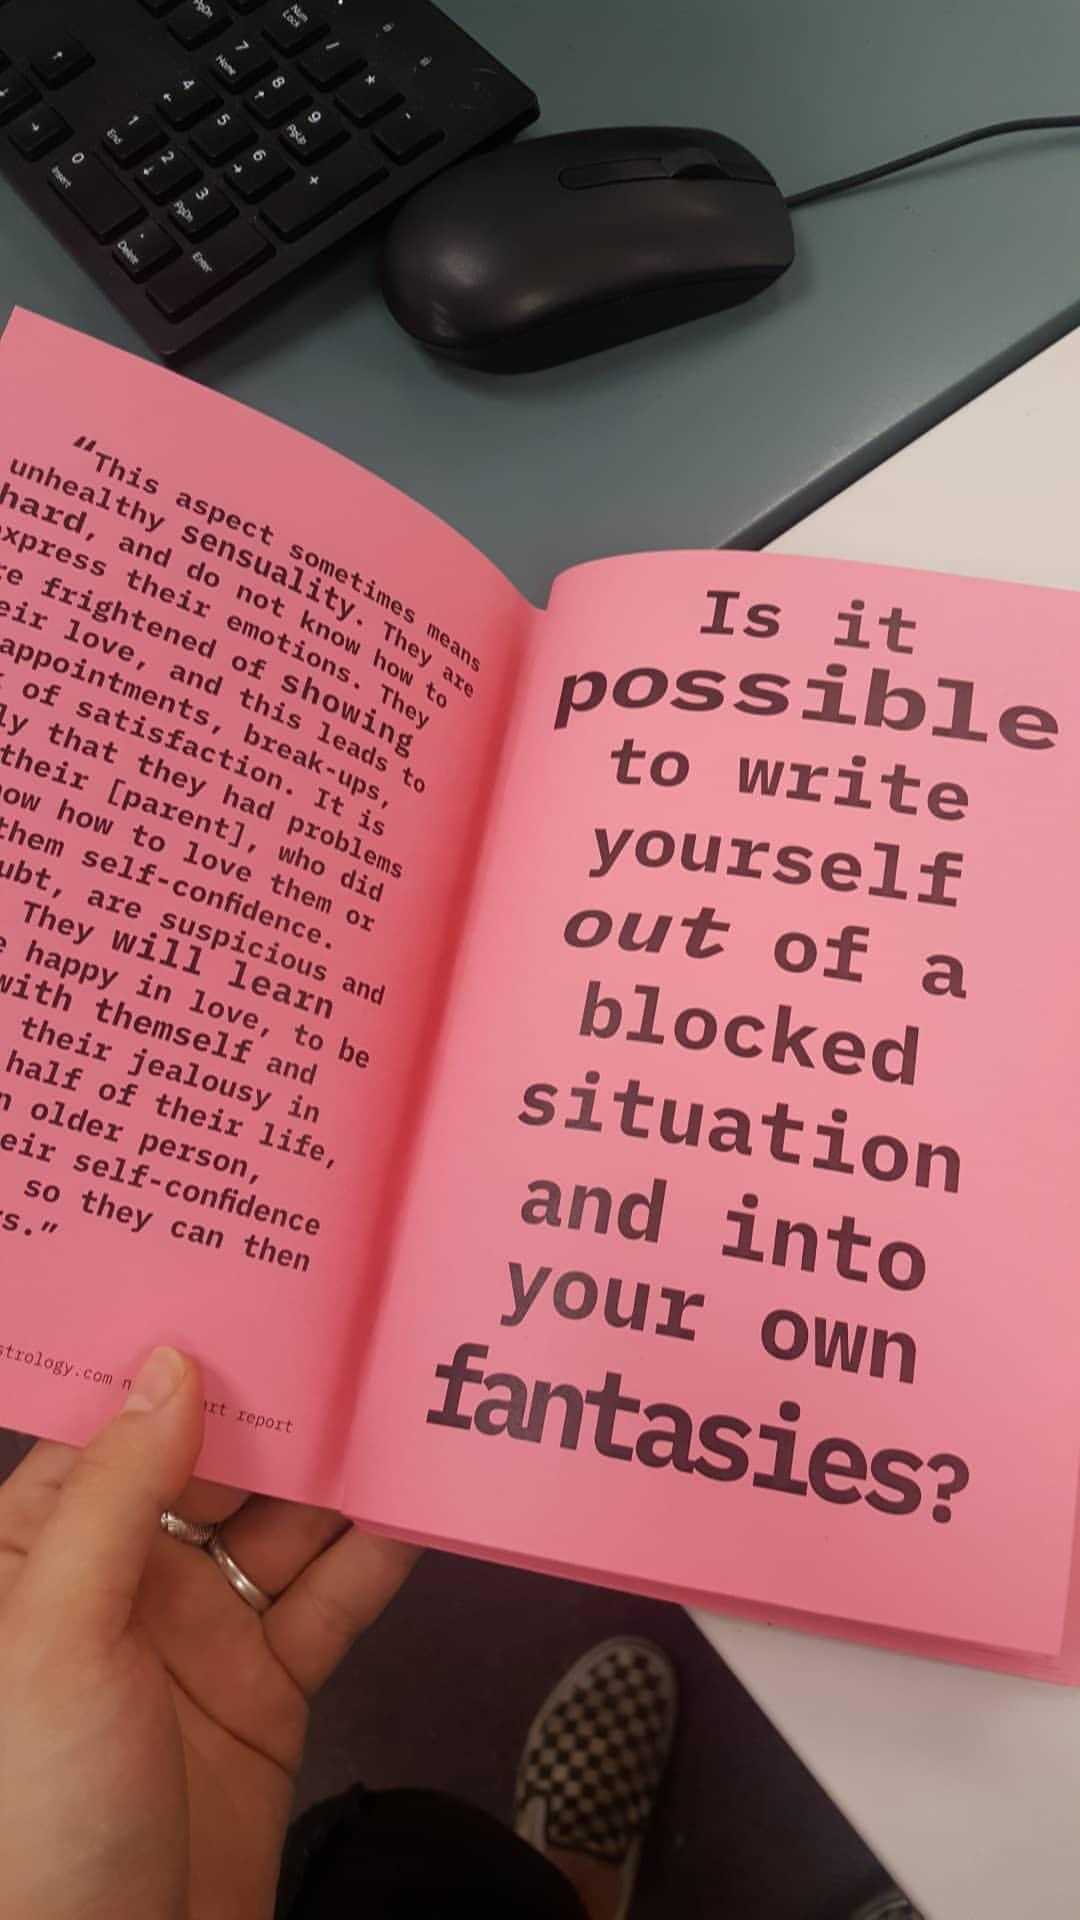 VENUS SATURN SQUARE smut zine, a physical reality